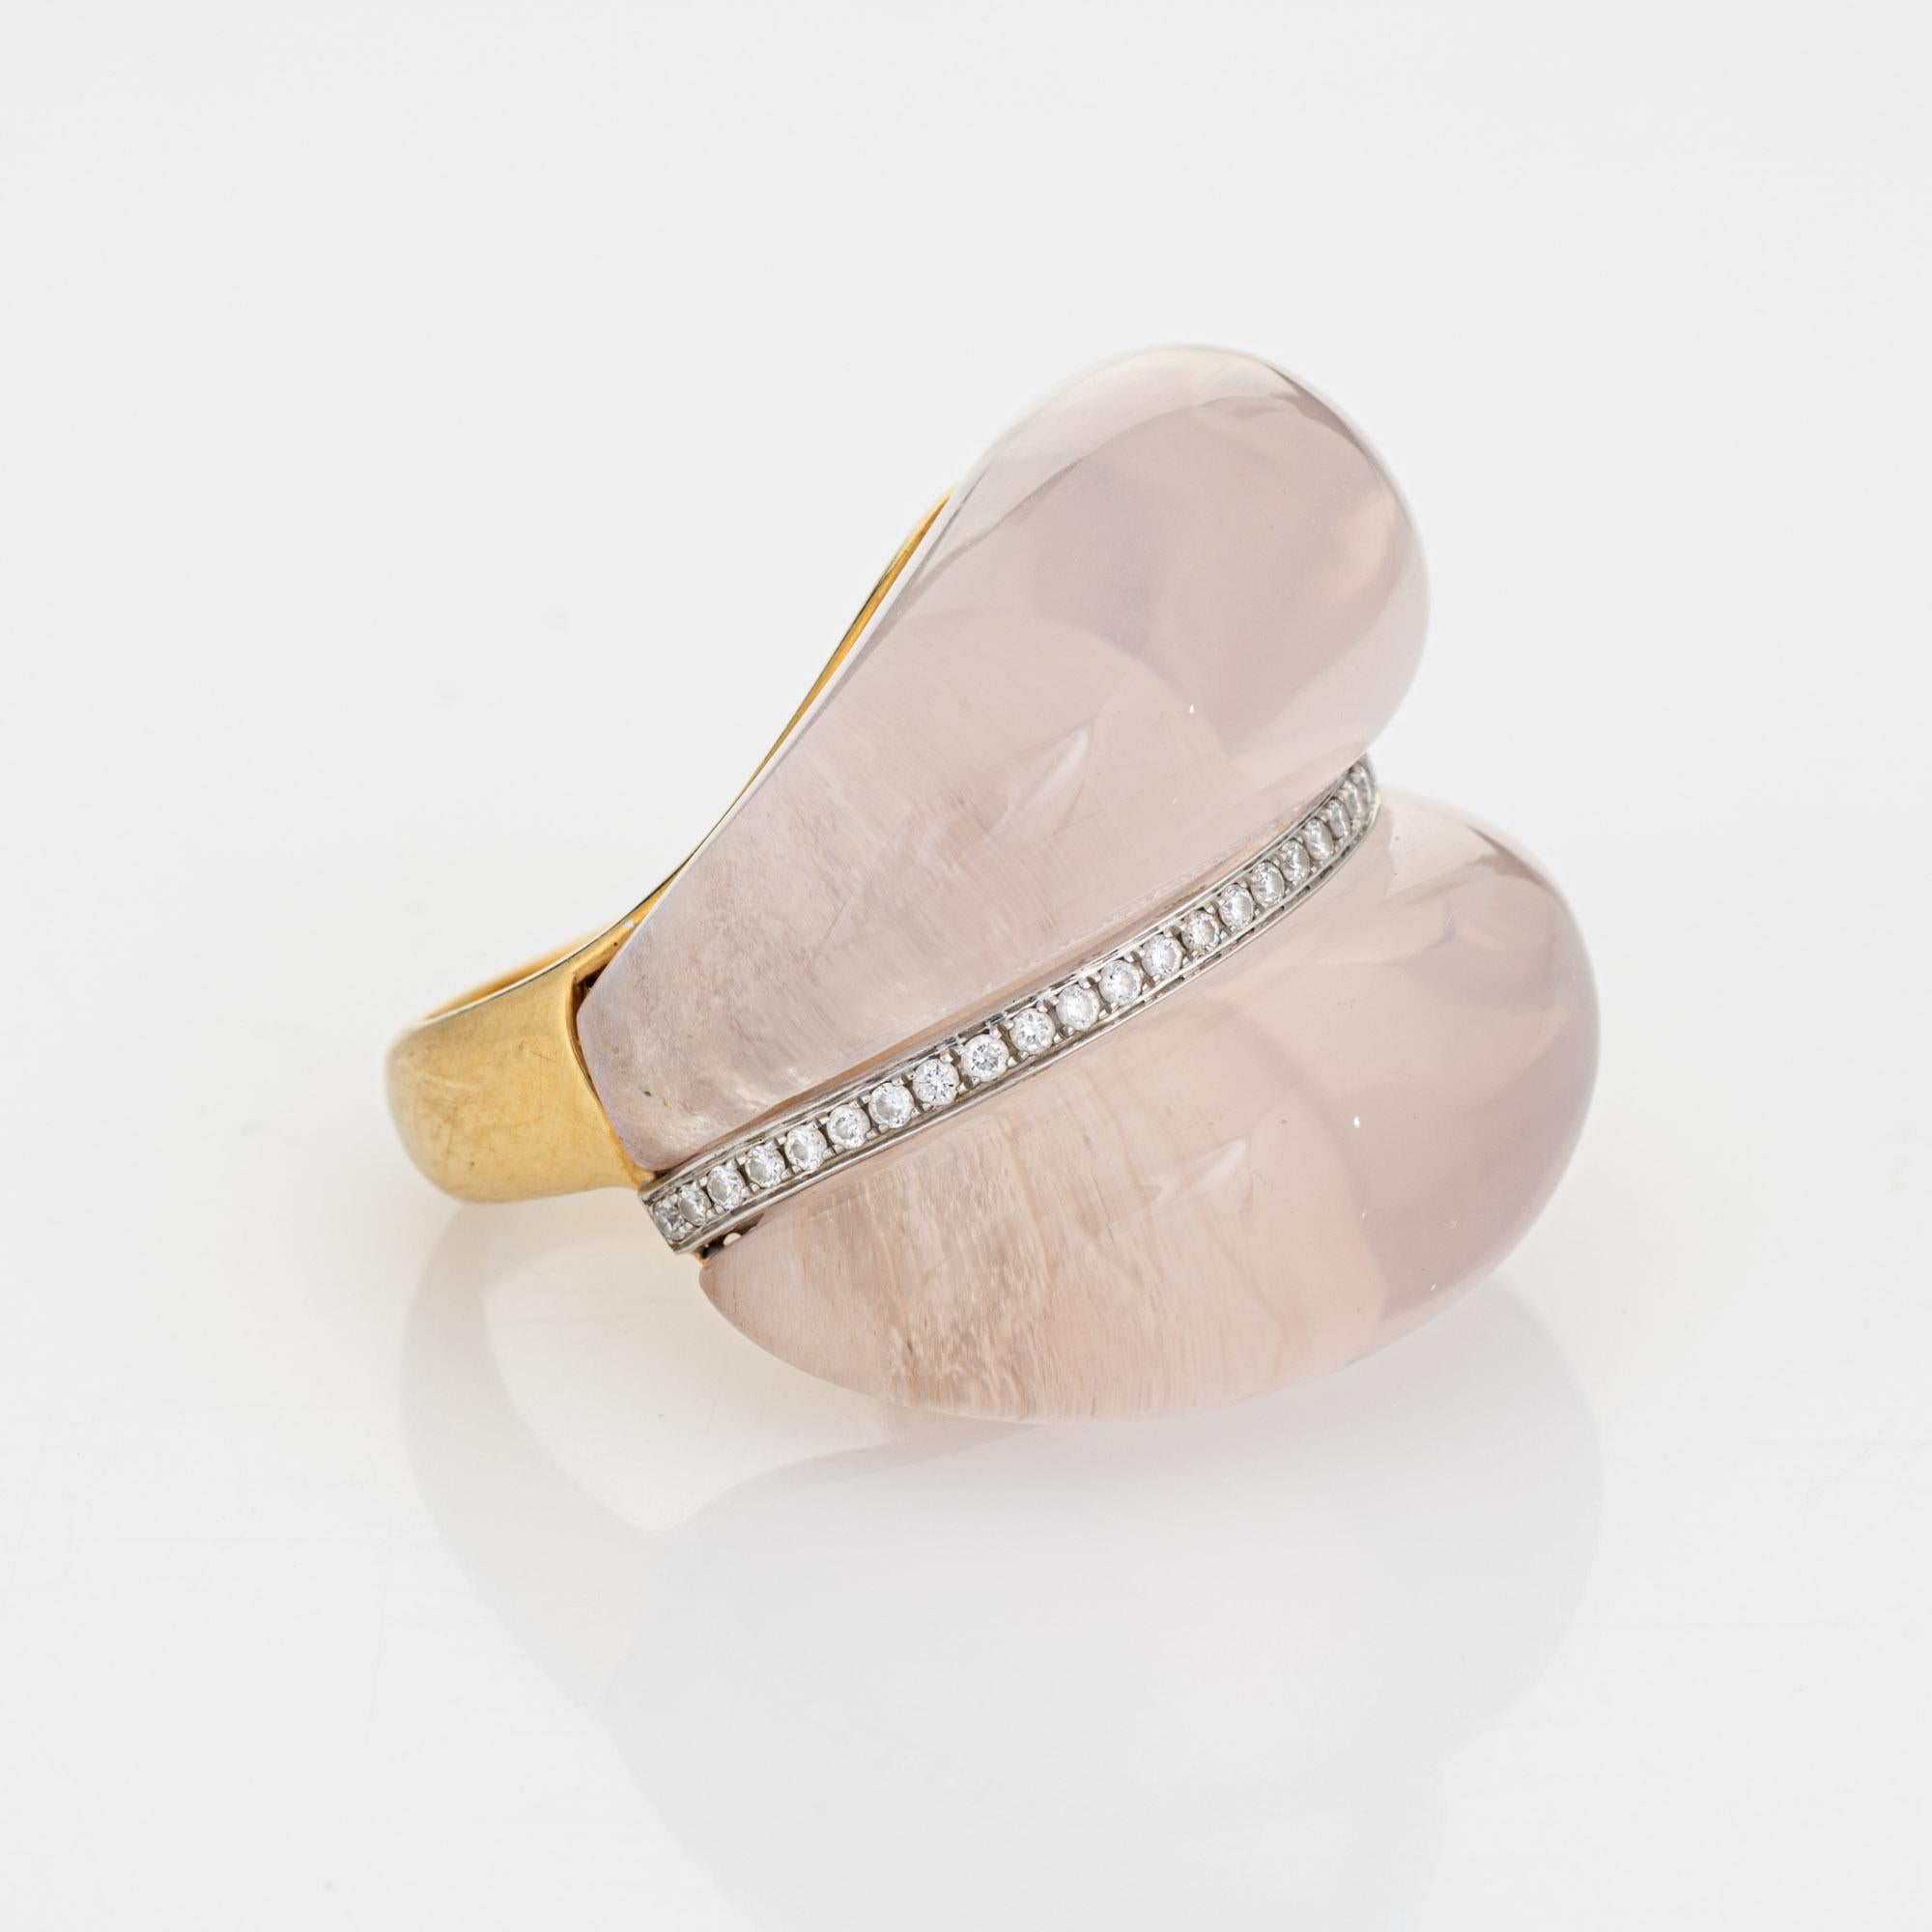 Cabochon Contemporary Rose Quartz Diamond Ring Estate 18k Yellow Gold Limited Edition For Sale